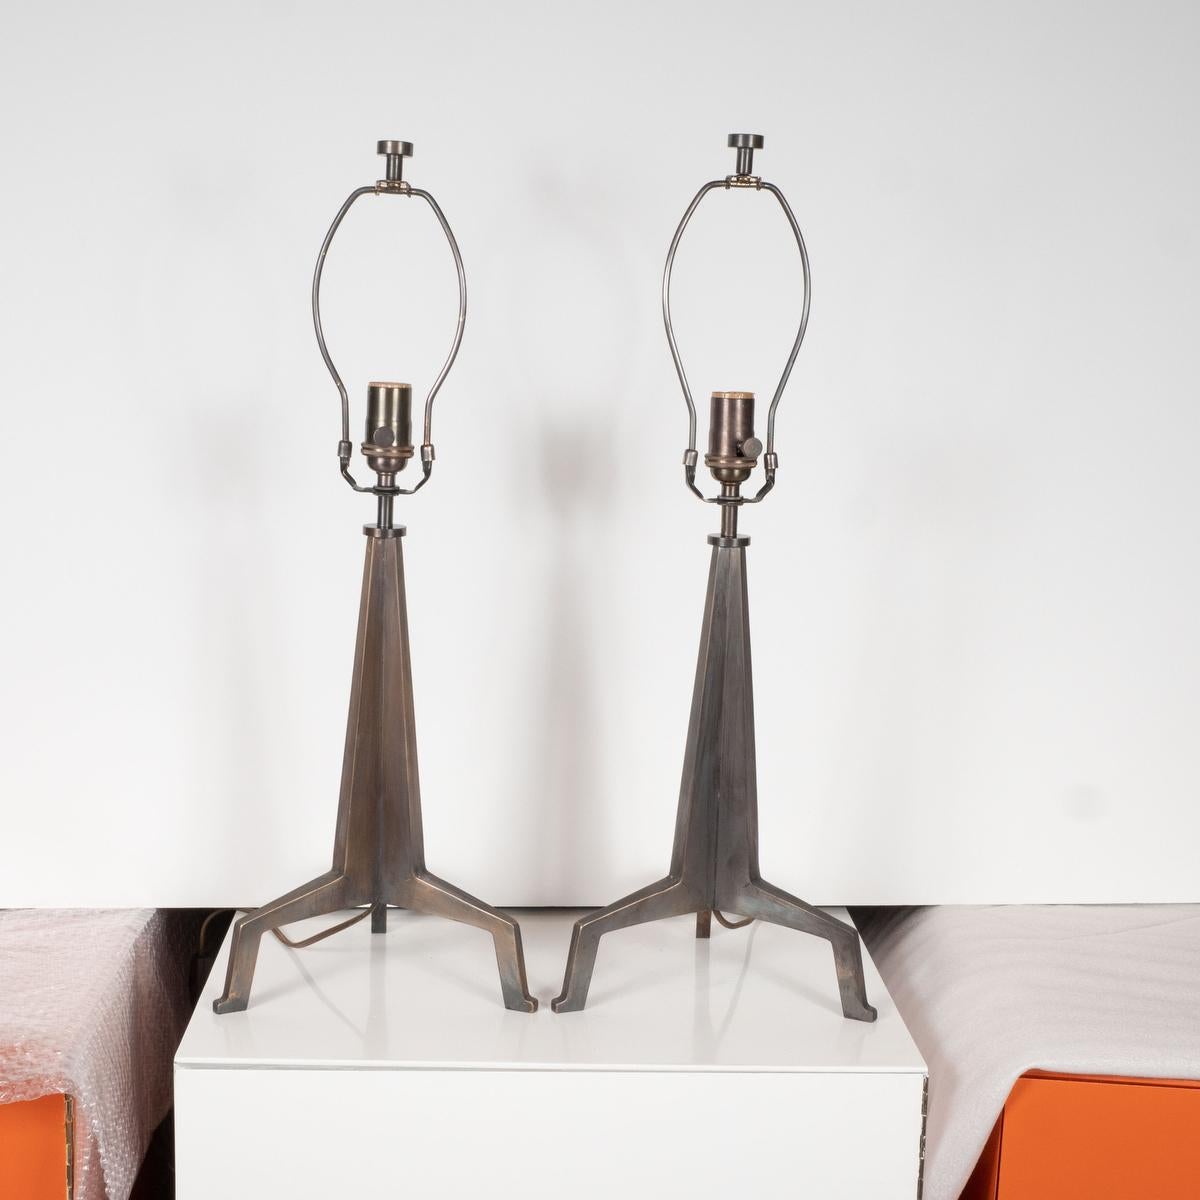 Pair of Brutalist Tripod Lamps by Marcelo Bessa In New Condition For Sale In Tarrytown, NY